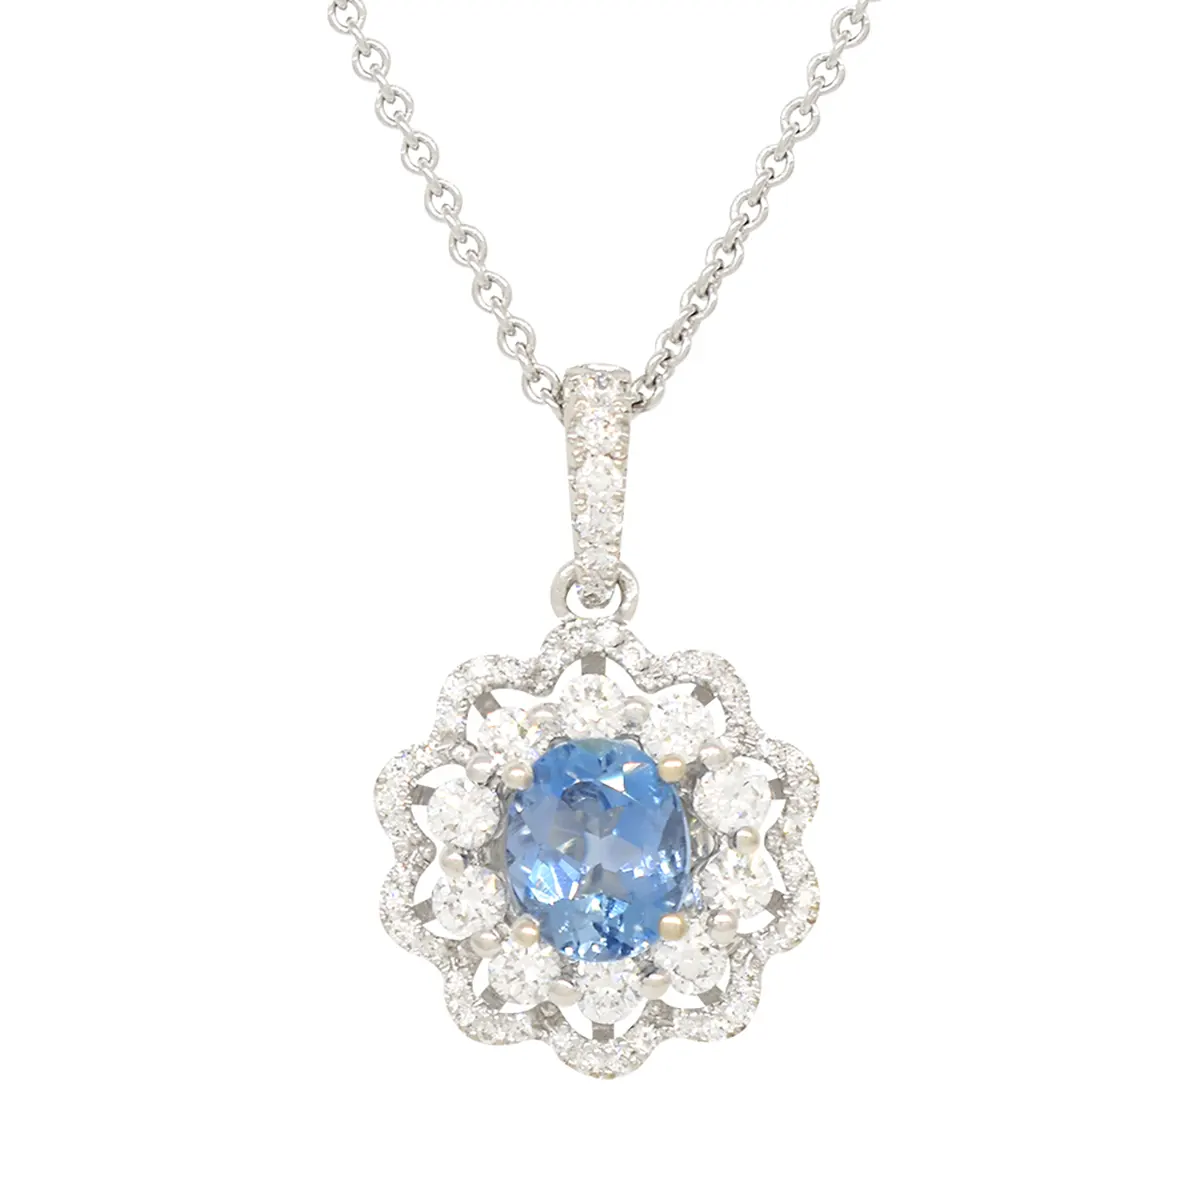 18k-white-gold-aquamarine-and-diamond-pendant-necklace-with-stunning-blue-color